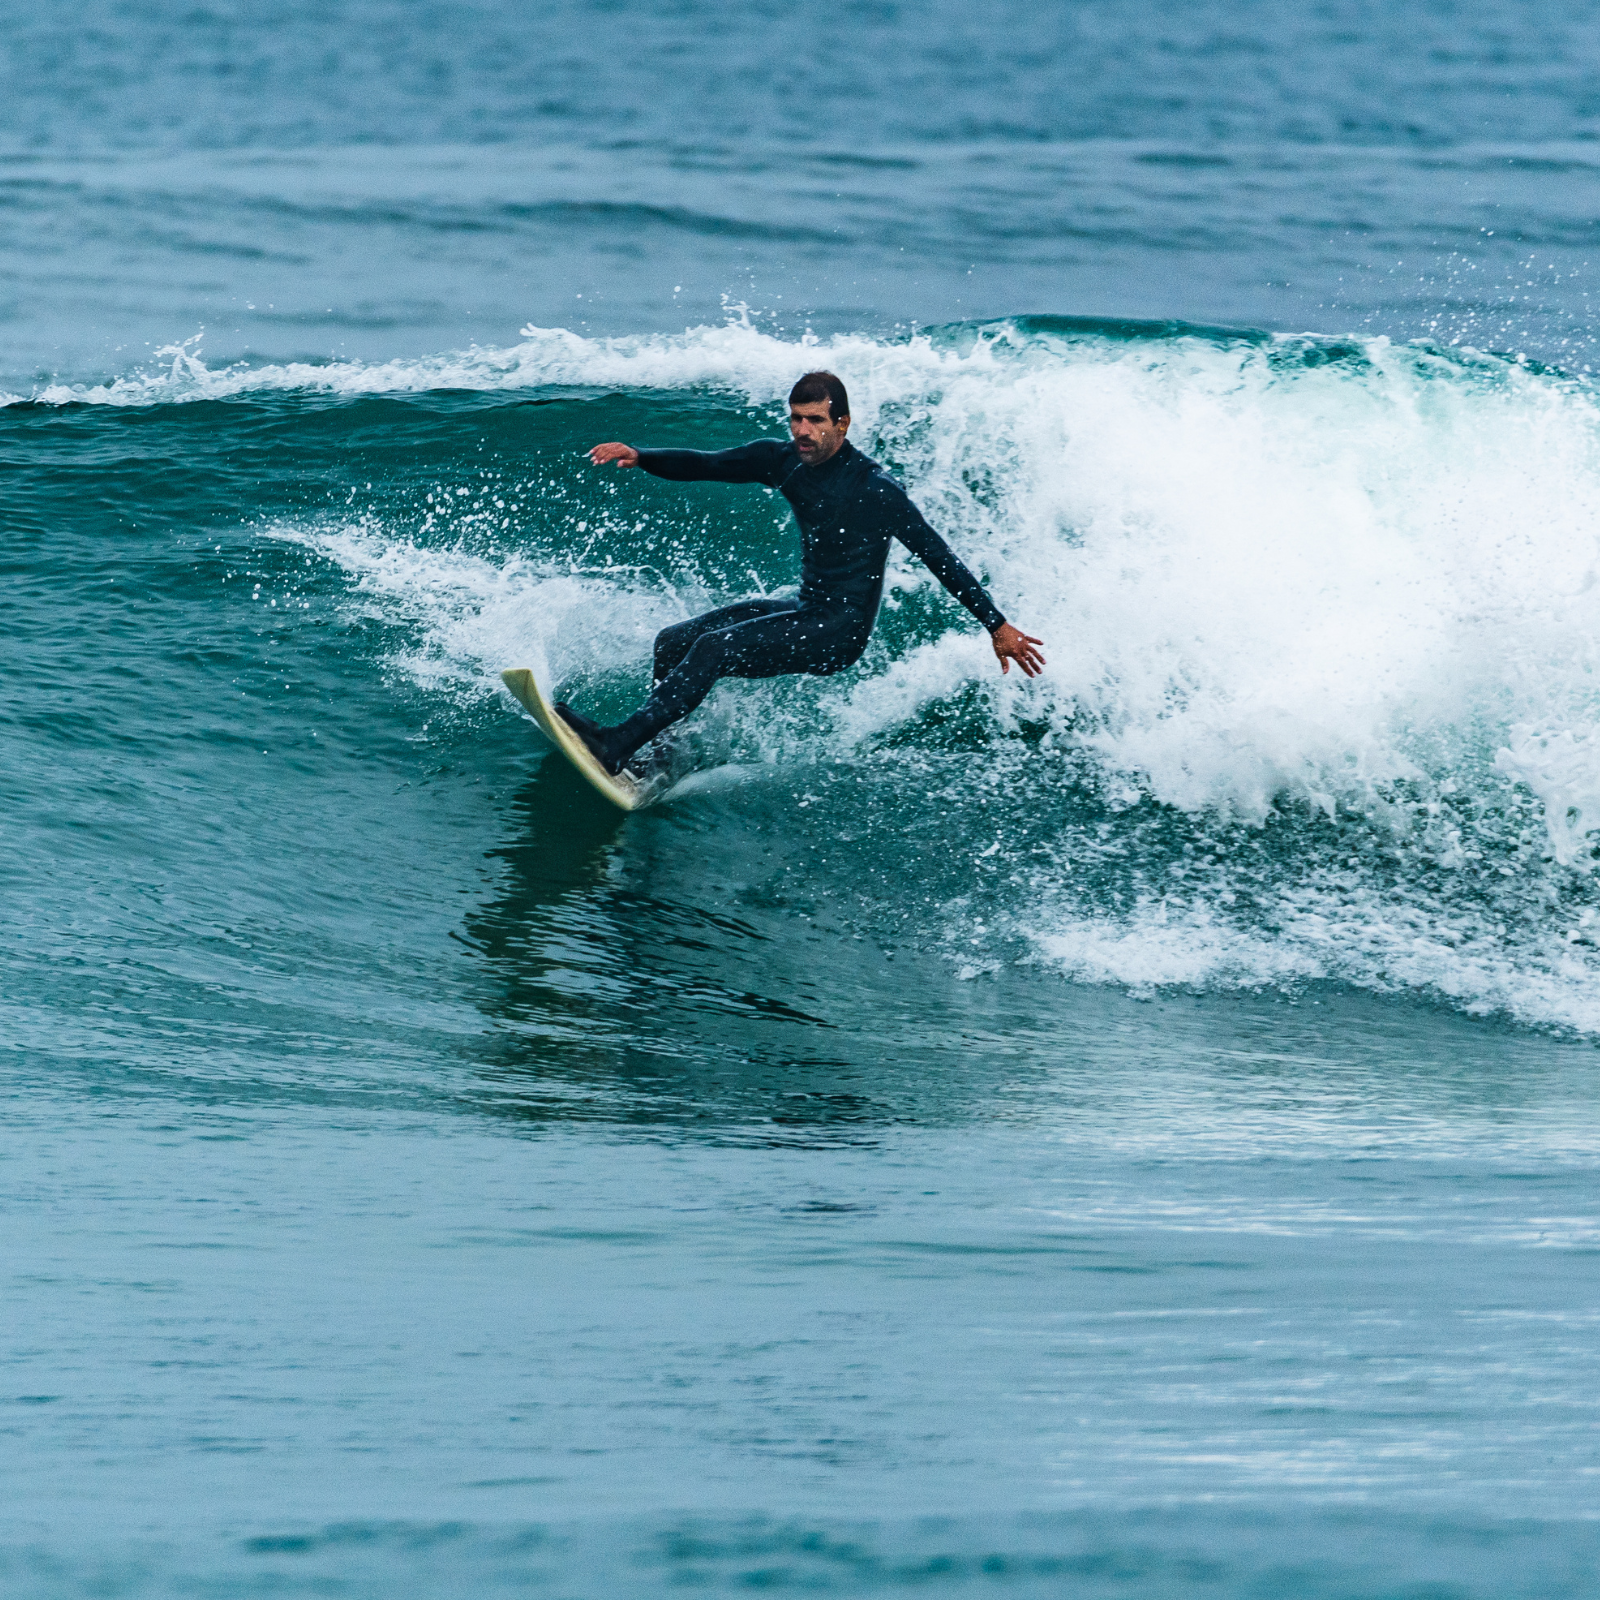 man surfing on a shortboard in a black wetsuit